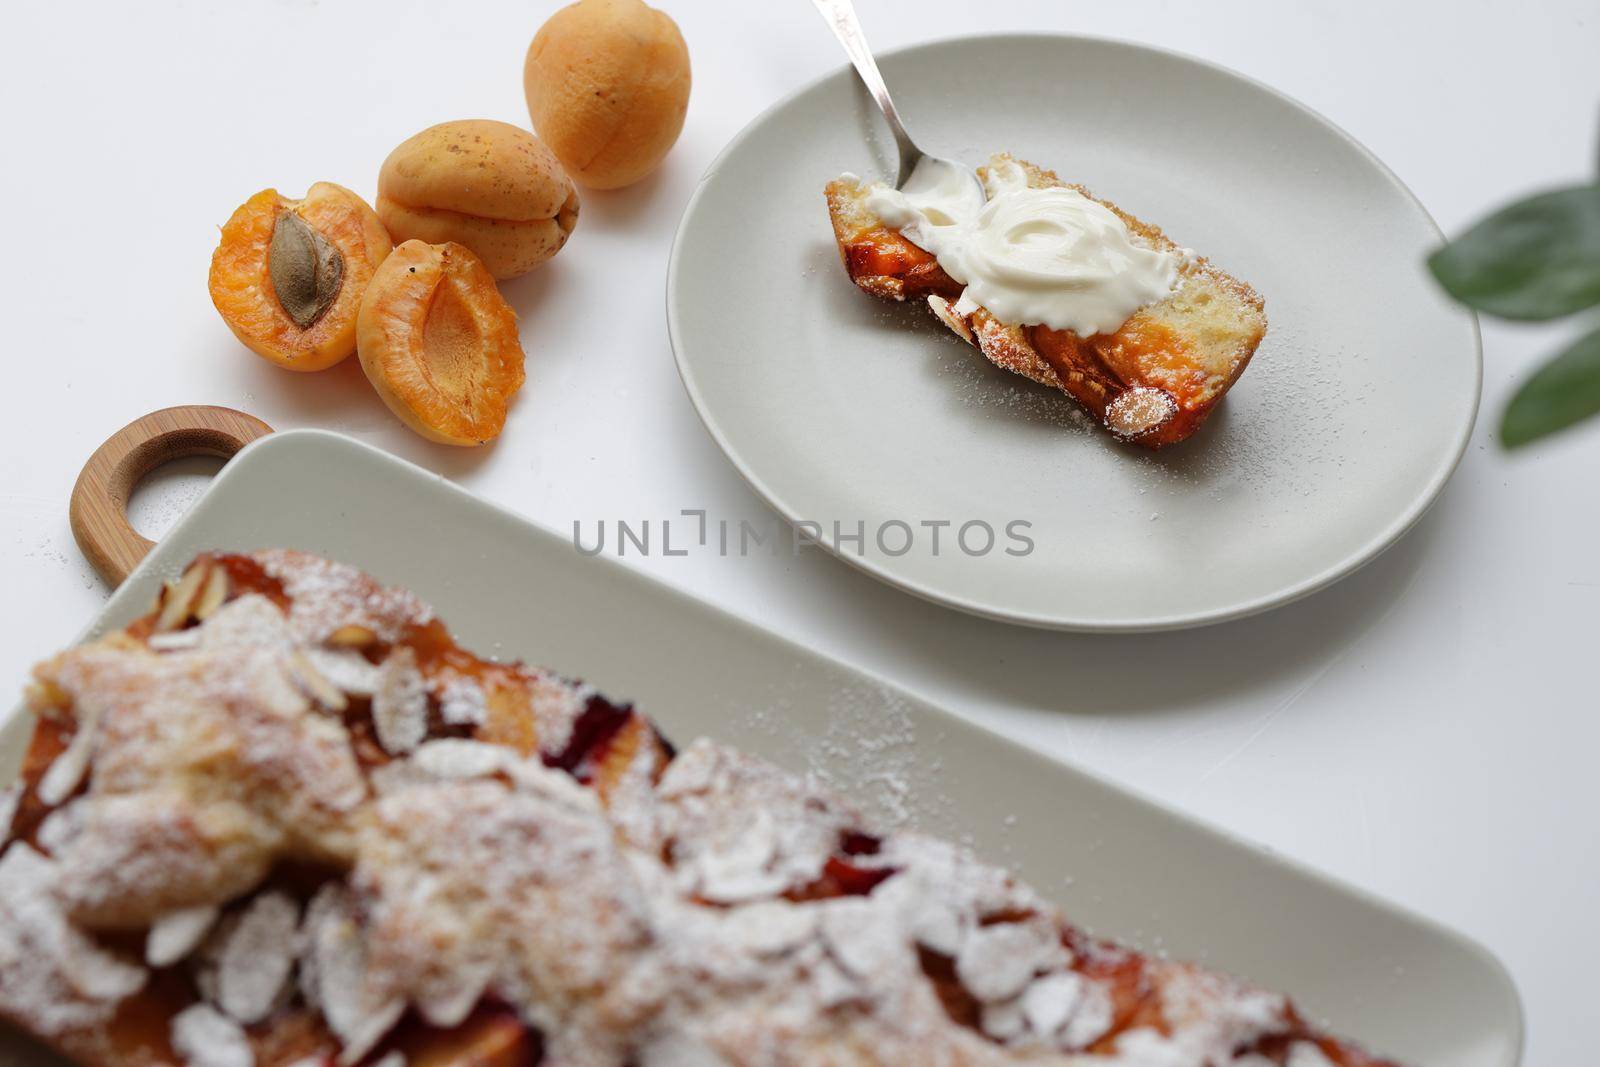 rectangular appetizing homemade apricot pie on a rectangular plate, on a wooden cutting board. Next to it is a round plate with a piece of cake and a spoonful of cream. Daylight, white background